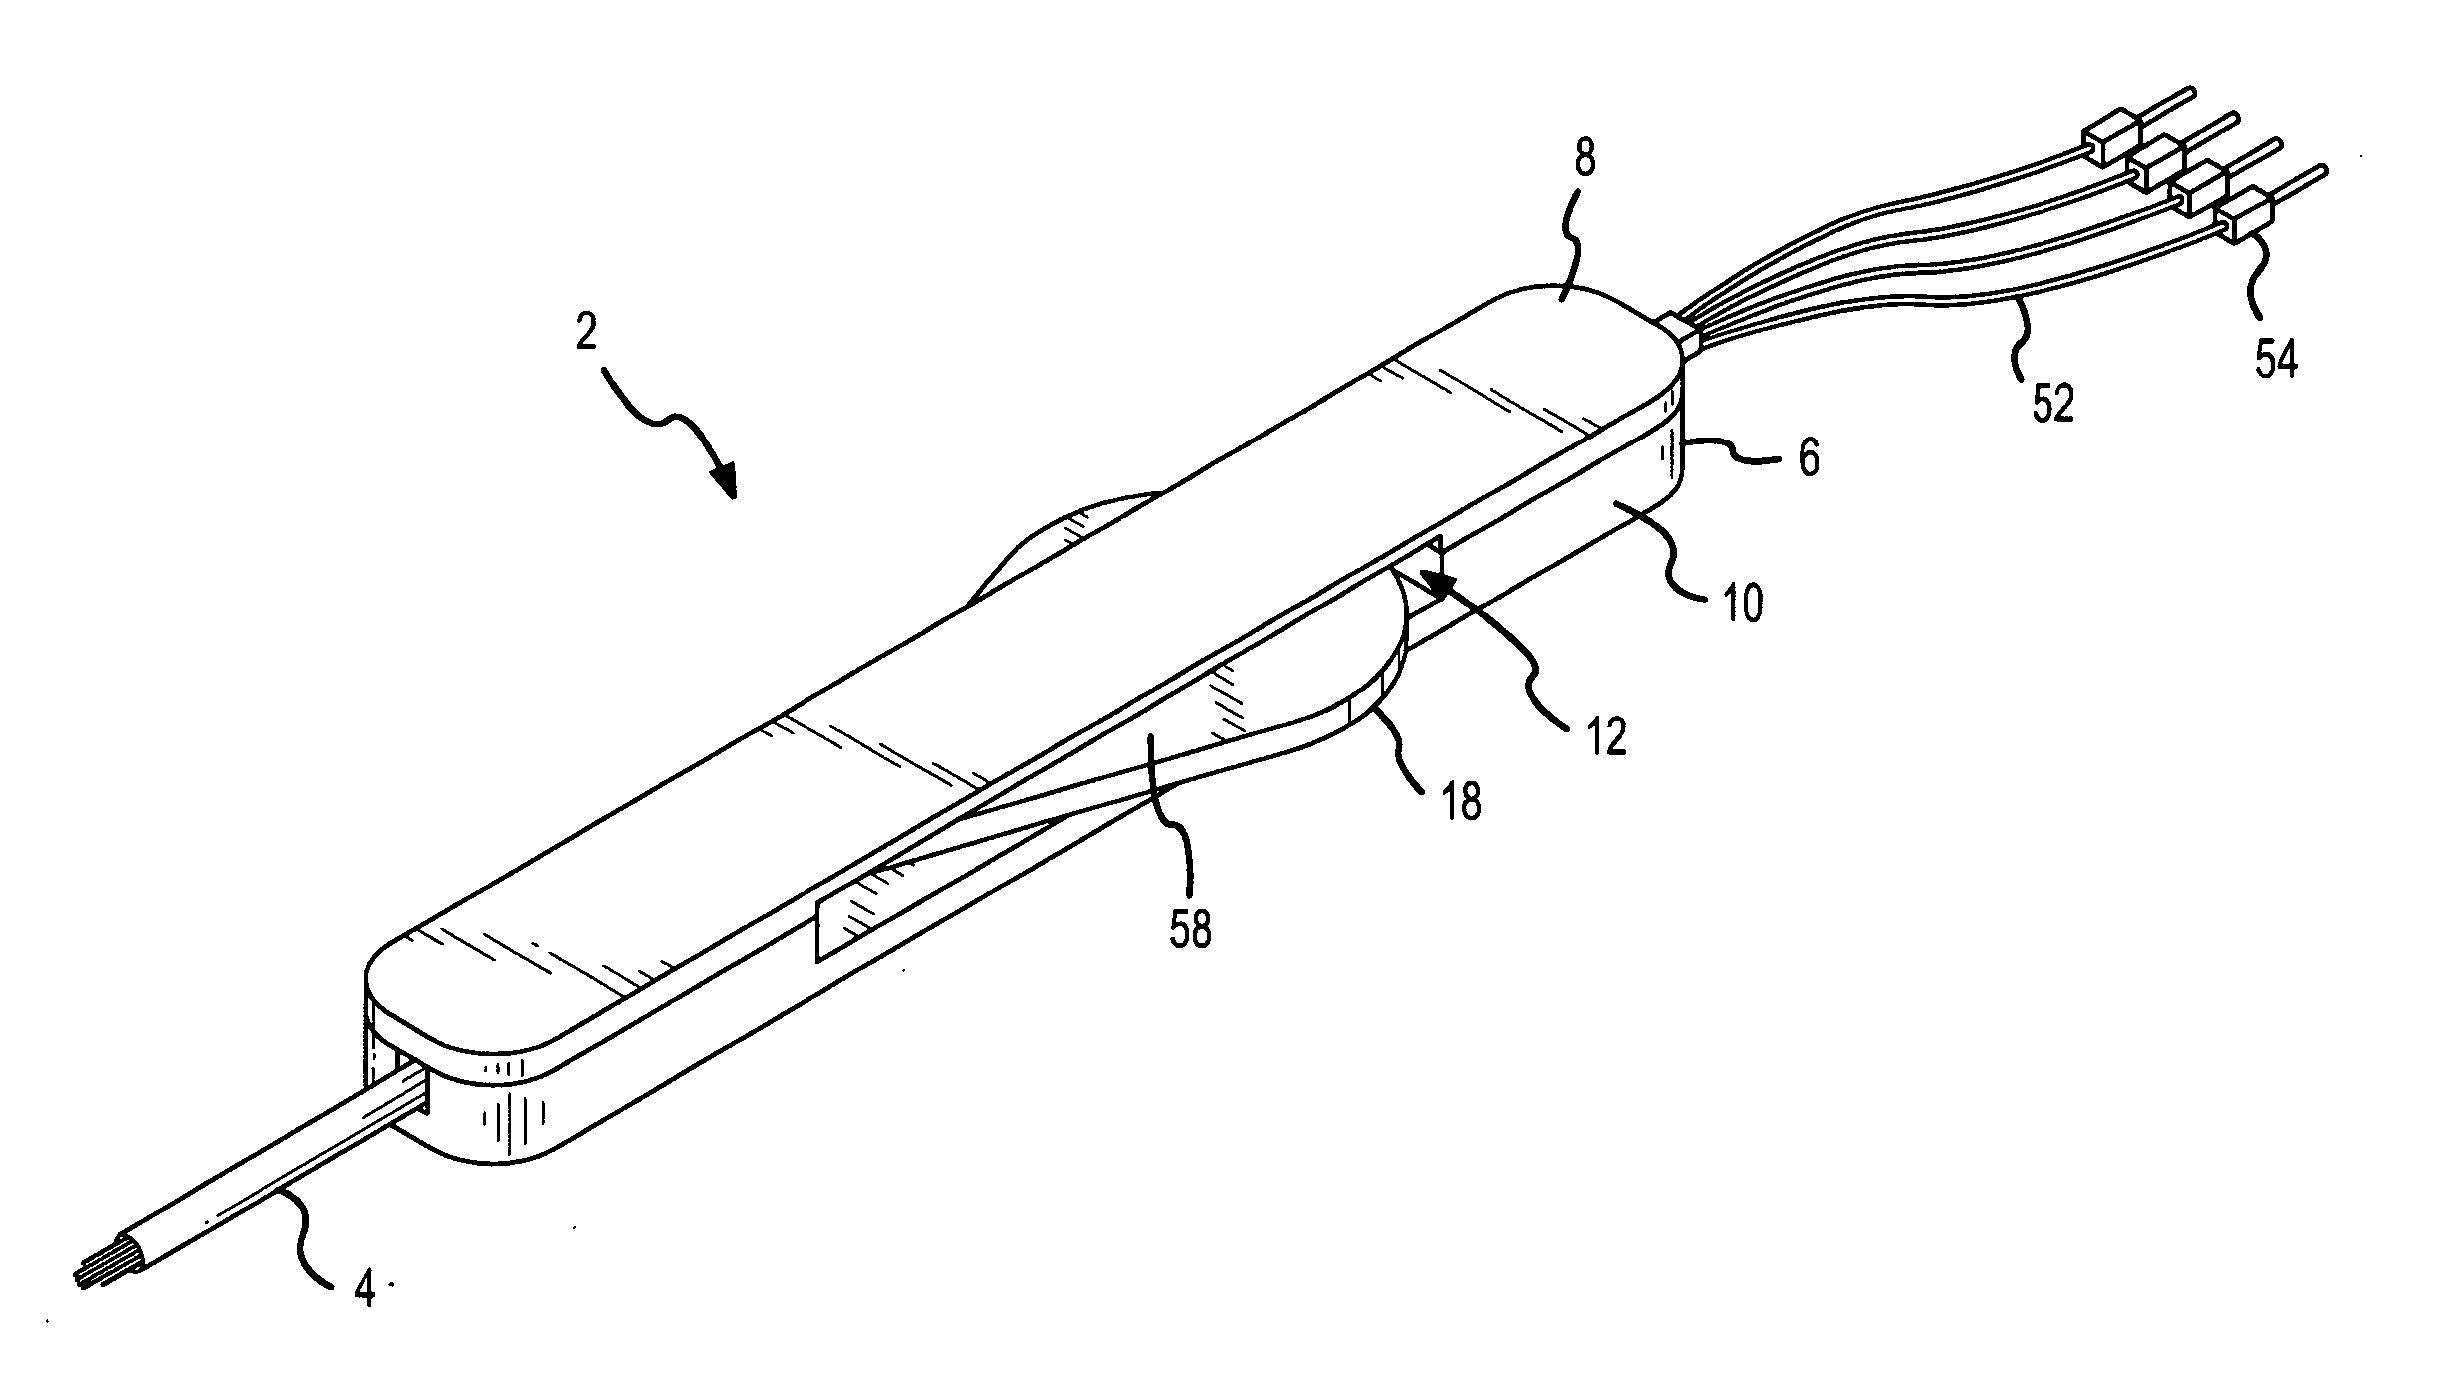 Steerable catheter with hydraulic or pneumatic actuator